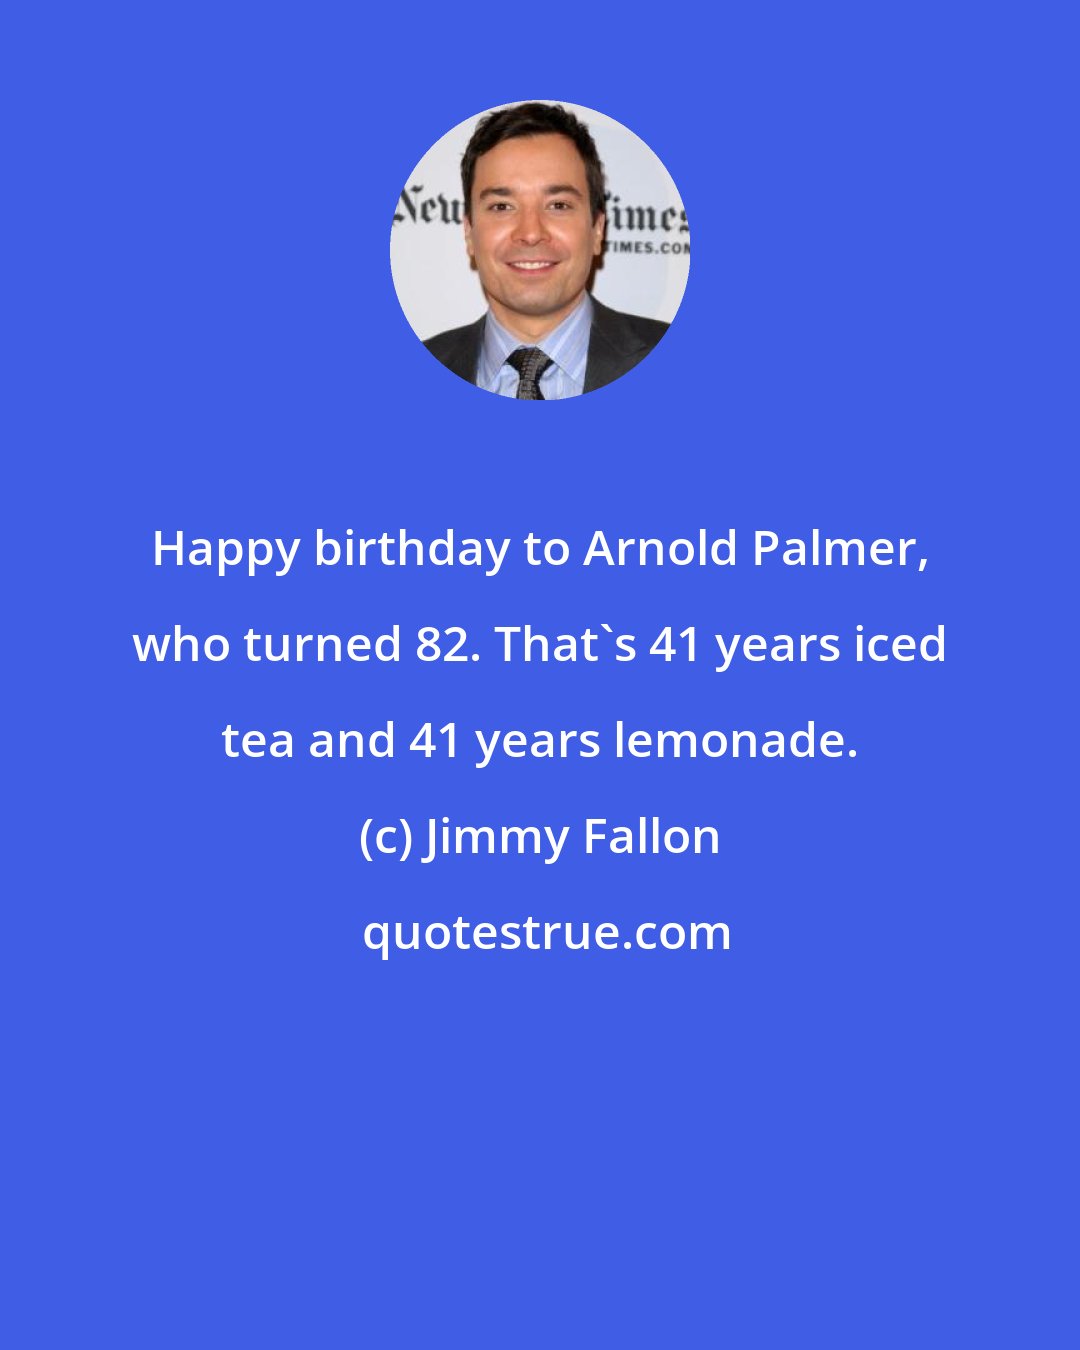 Jimmy Fallon: Happy birthday to Arnold Palmer, who turned 82. That's 41 years iced tea and 41 years lemonade.